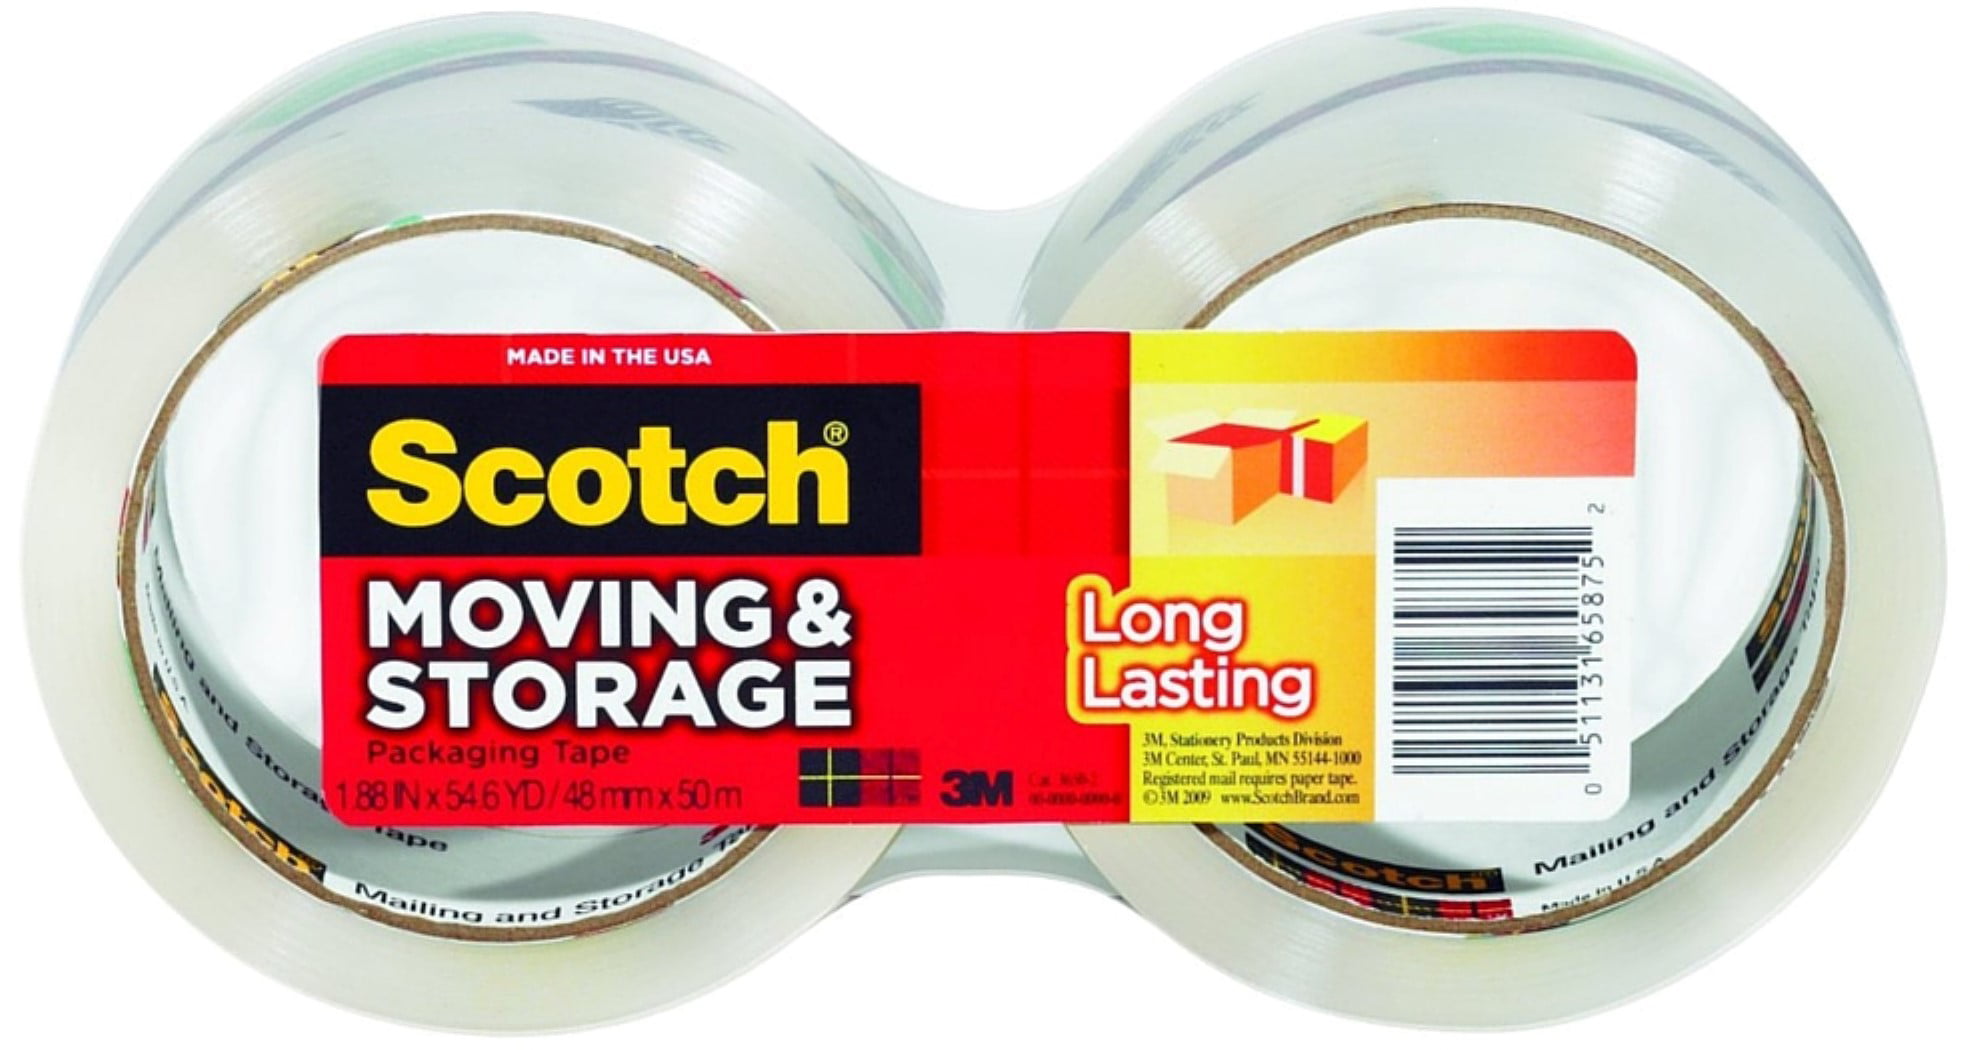 Long Lasting 1.88 in x 38.20 yd 1 ea 3pk Storage Tape Scotch Moving 